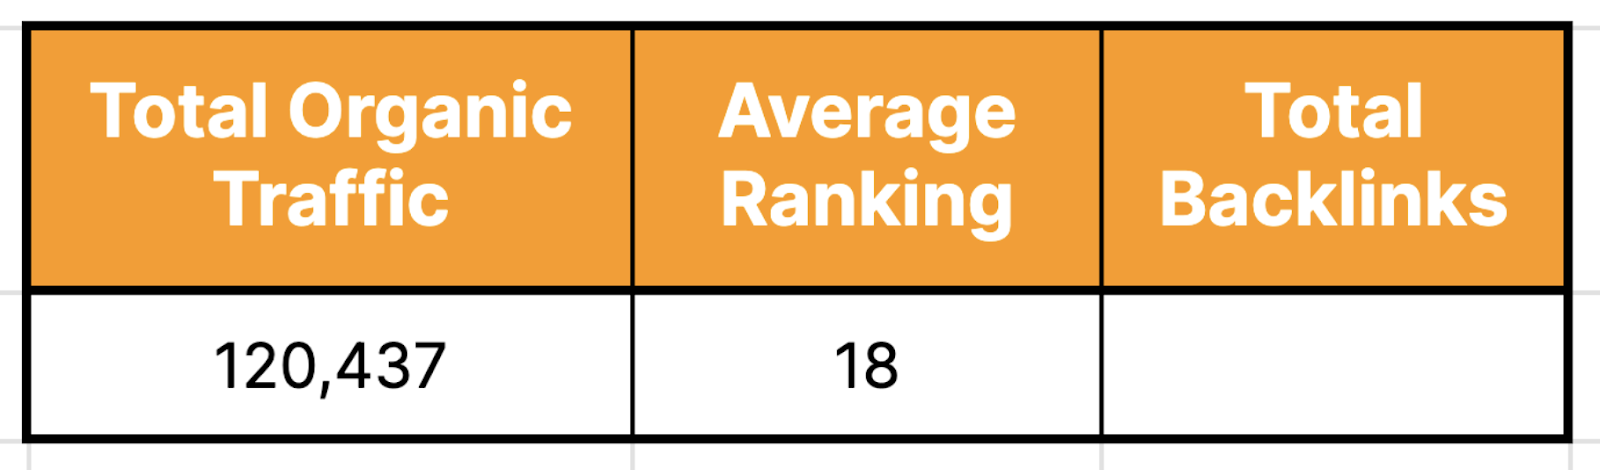 content audit template average ranking number calculated to be 18